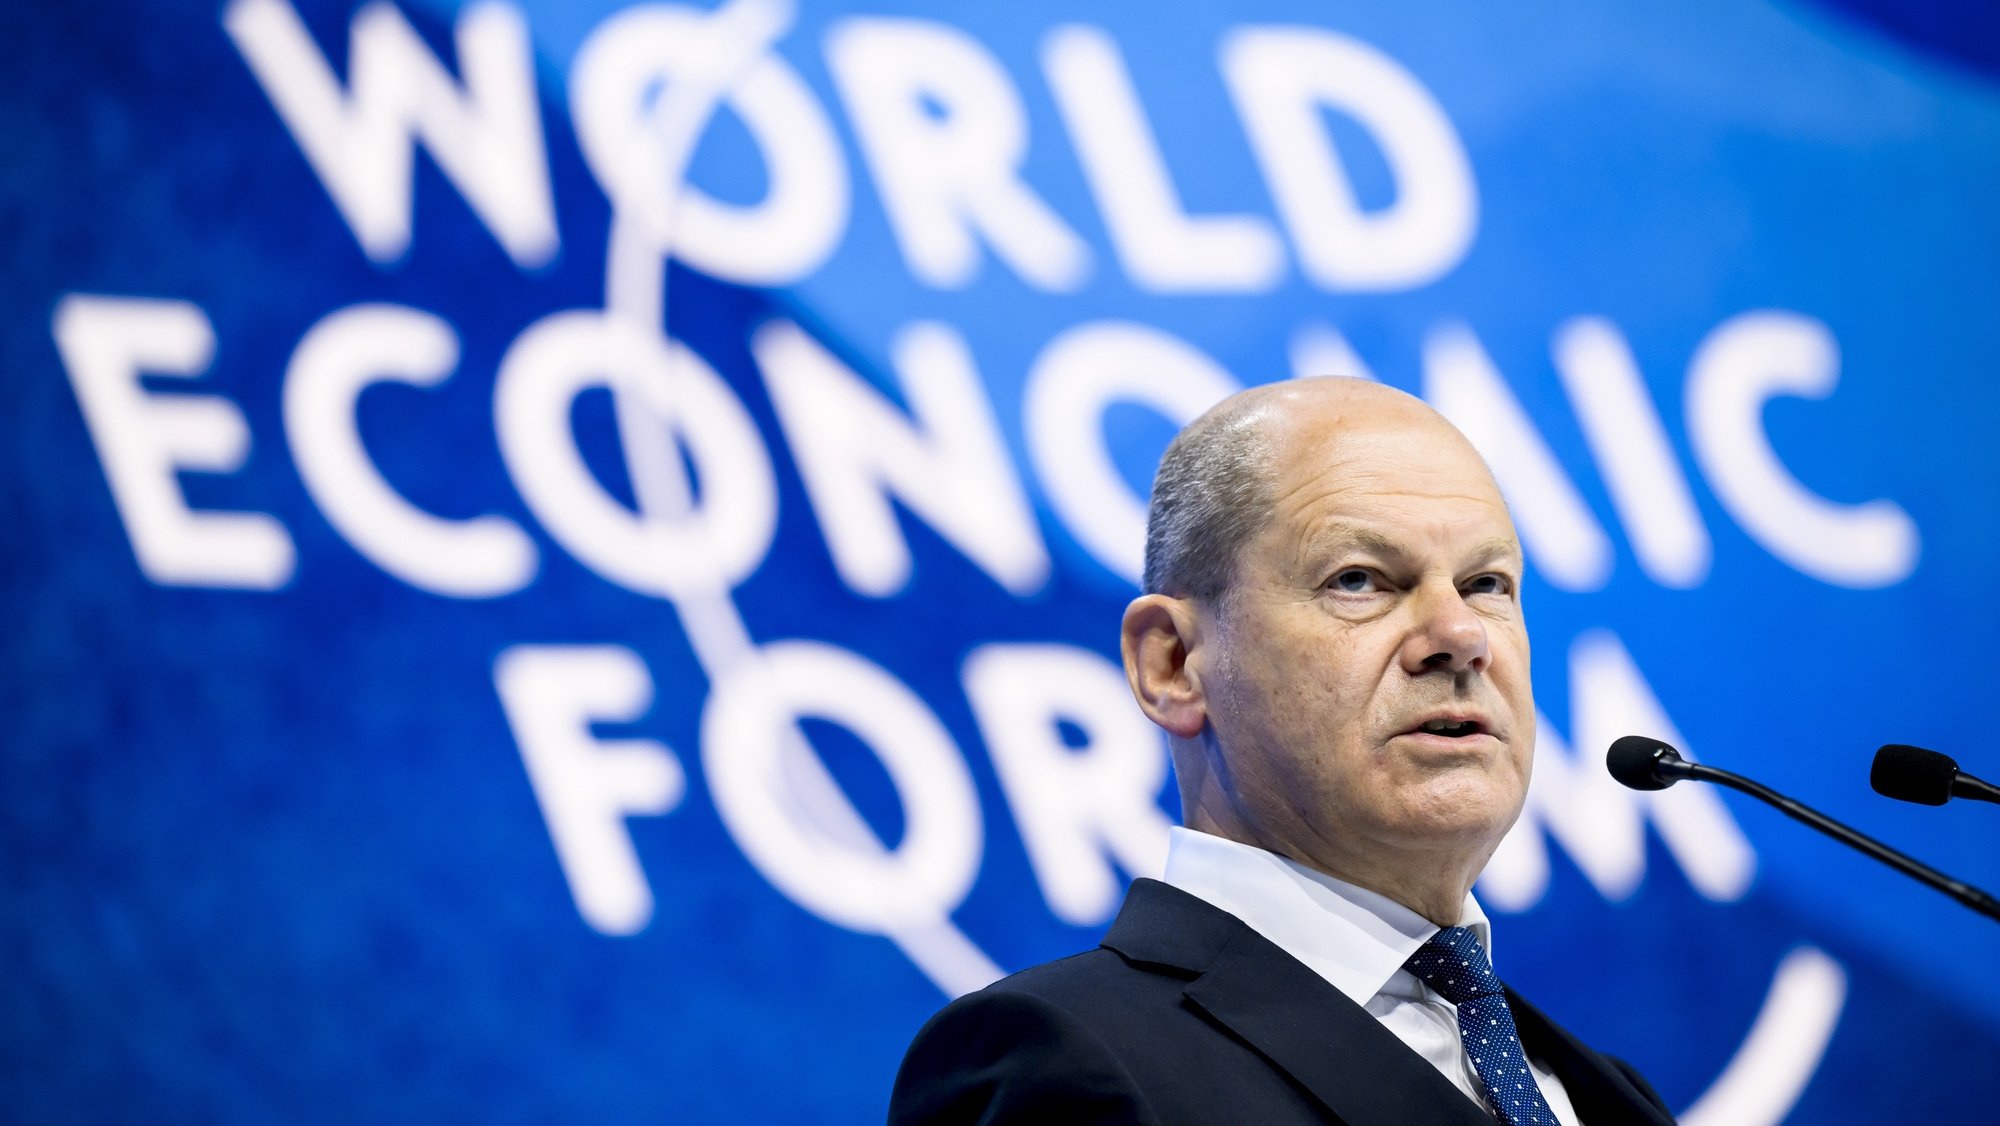 epaselect epa09976536 German Chancellor Olaf Scholz addresses a plenary session during the 51st annual meeting of the World Economic Forum (WEF) in Davos, Switzerland, 26 May 2022. The meeting brings together entrepreneurs, scientists, corporate and political leaders in Davos under the topic &#039;History at a Turning Point: Government Policies and Business Strategies&#039; from 22 to 26 May 2022.  EPA/LAURENT GILLIERON